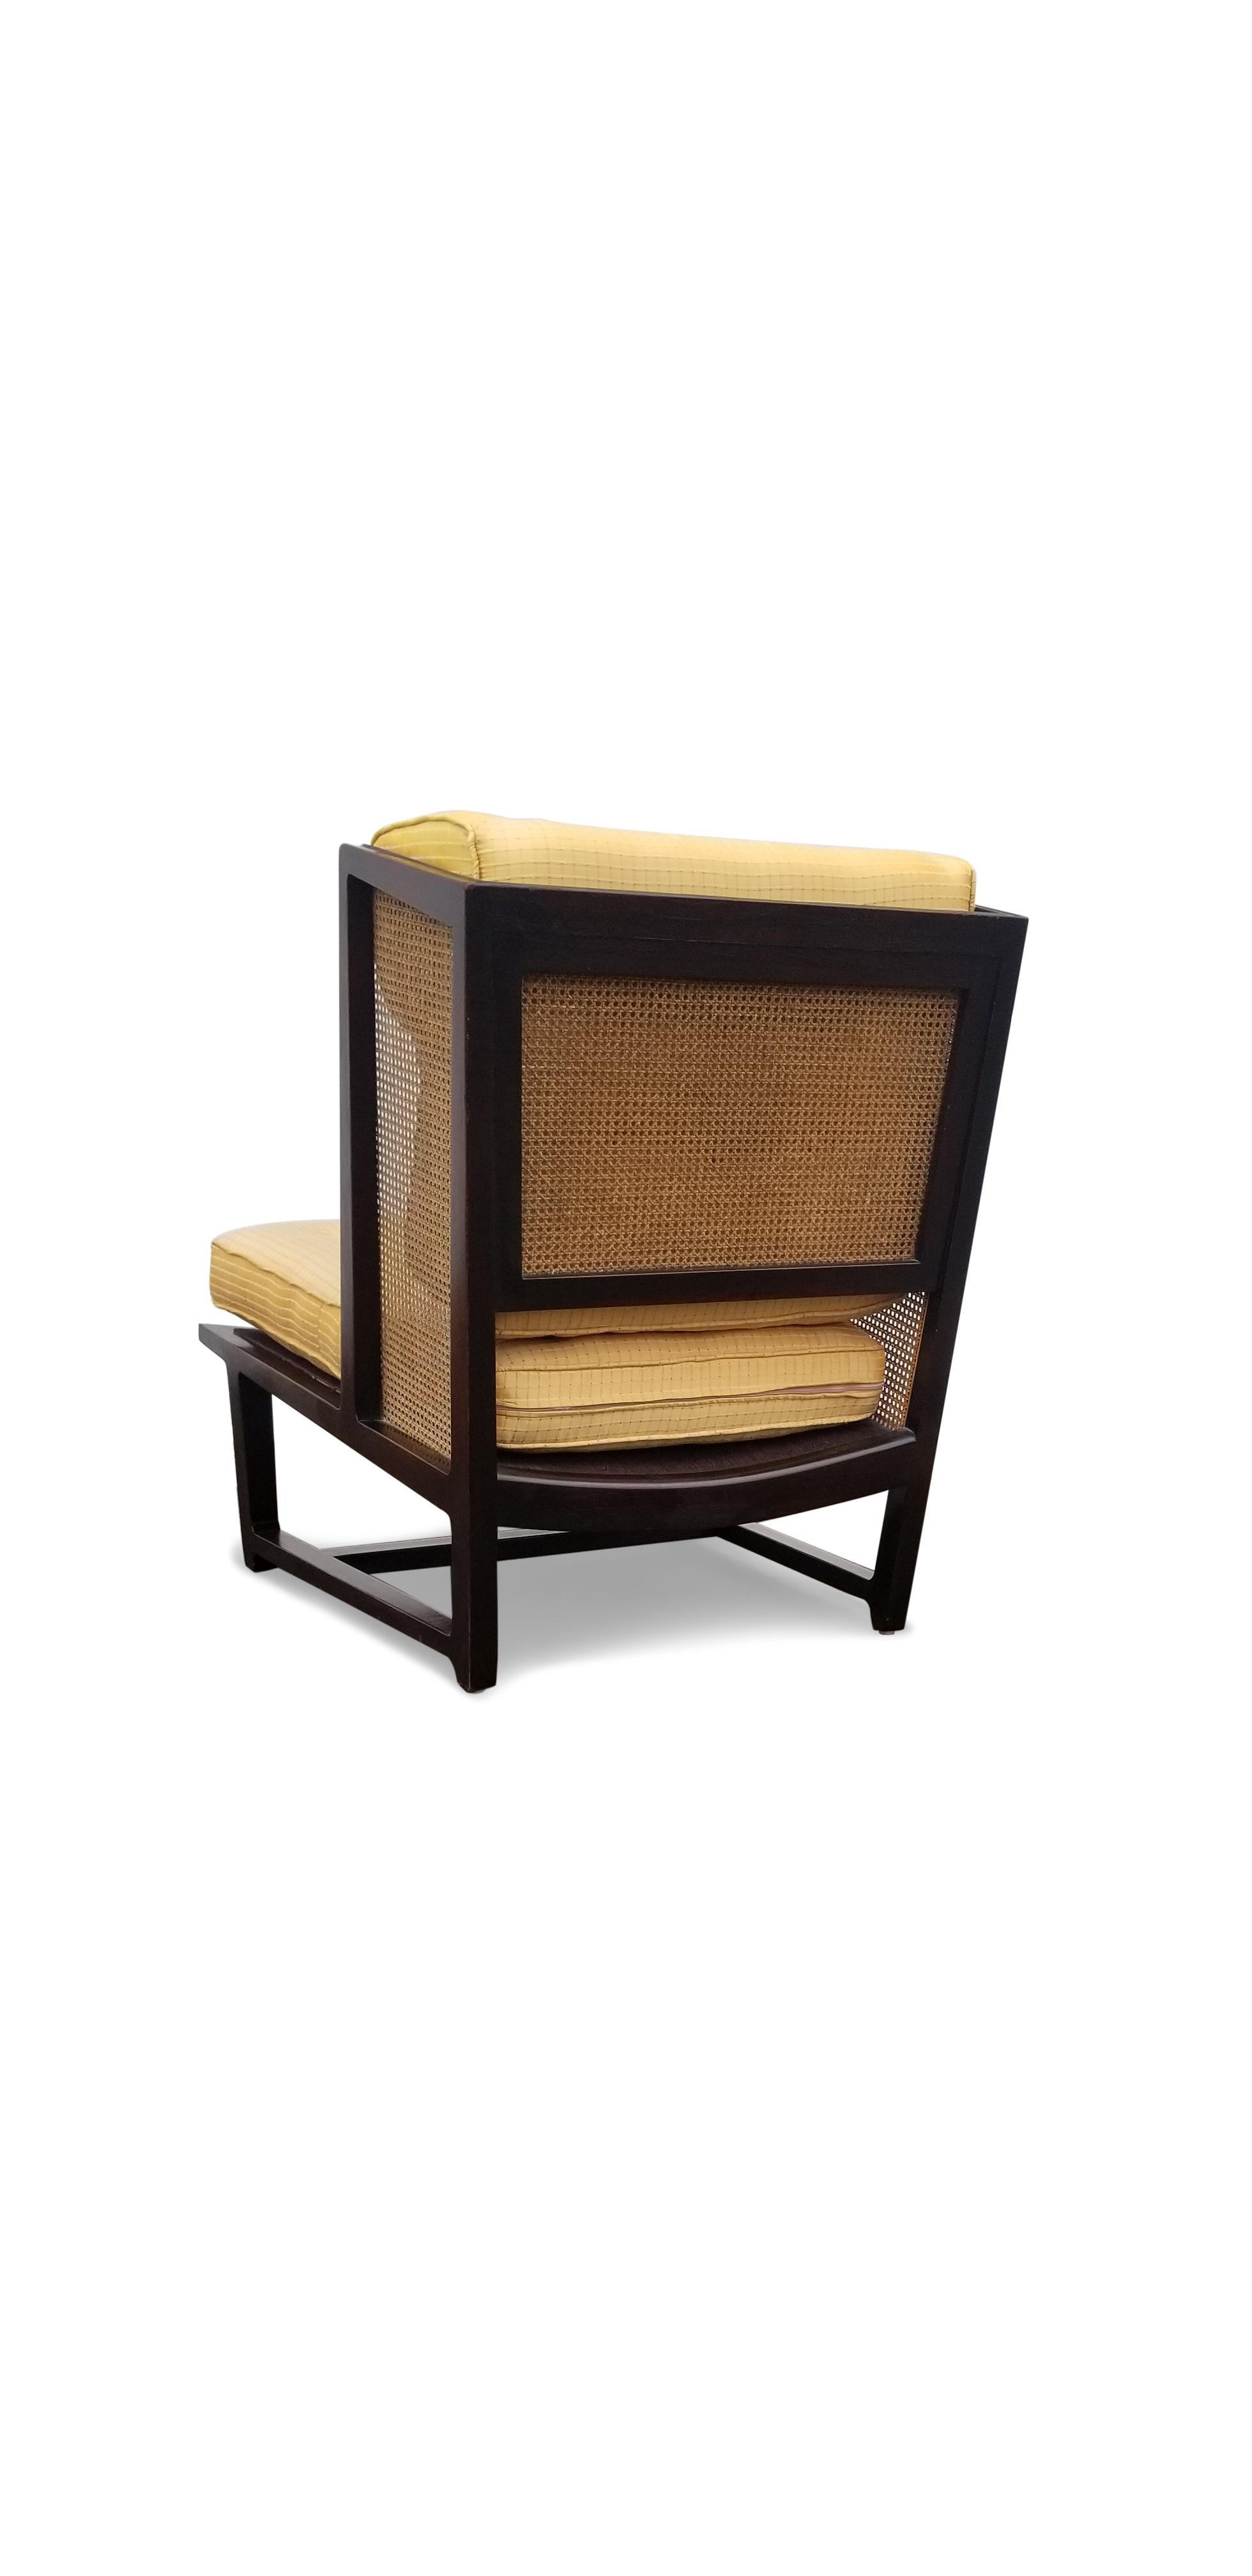 20th Century Edward Wormley for Dunbar Wing Lounge Chair Model 6016 For Sale